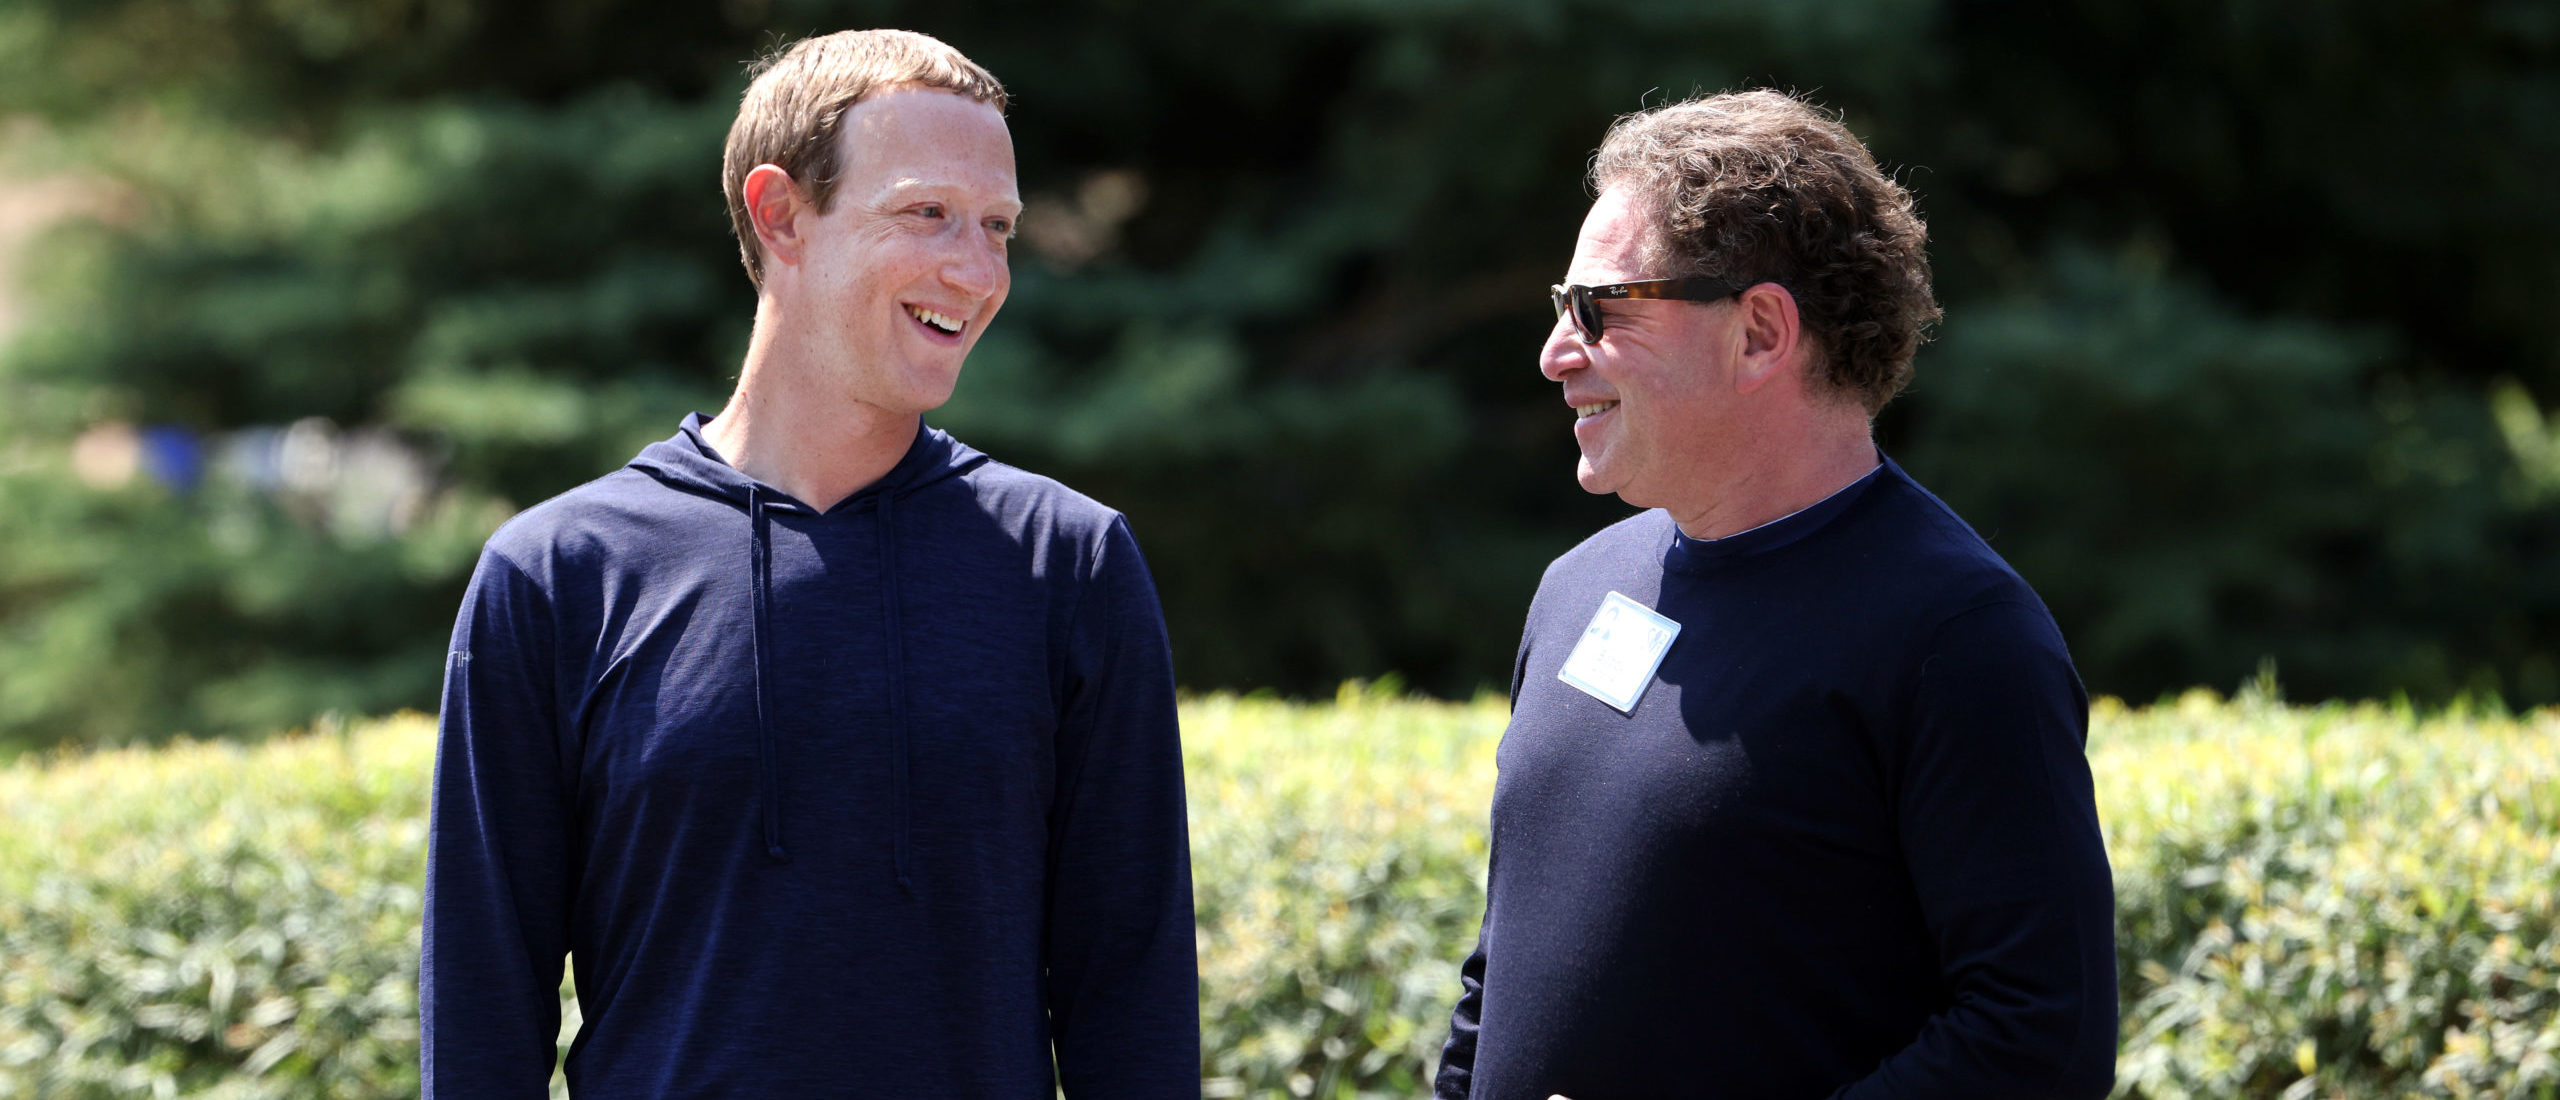 CEO of Facebook Mark Zuckerberg (L) talks to CEO of Activision Blizzard Bobby Kotick after a session at the Allen & Company Sun Valley Conference on July 08, 2021 in Sun Valley, Idaho. (Photo by Kevin Dietsch/Getty Images)